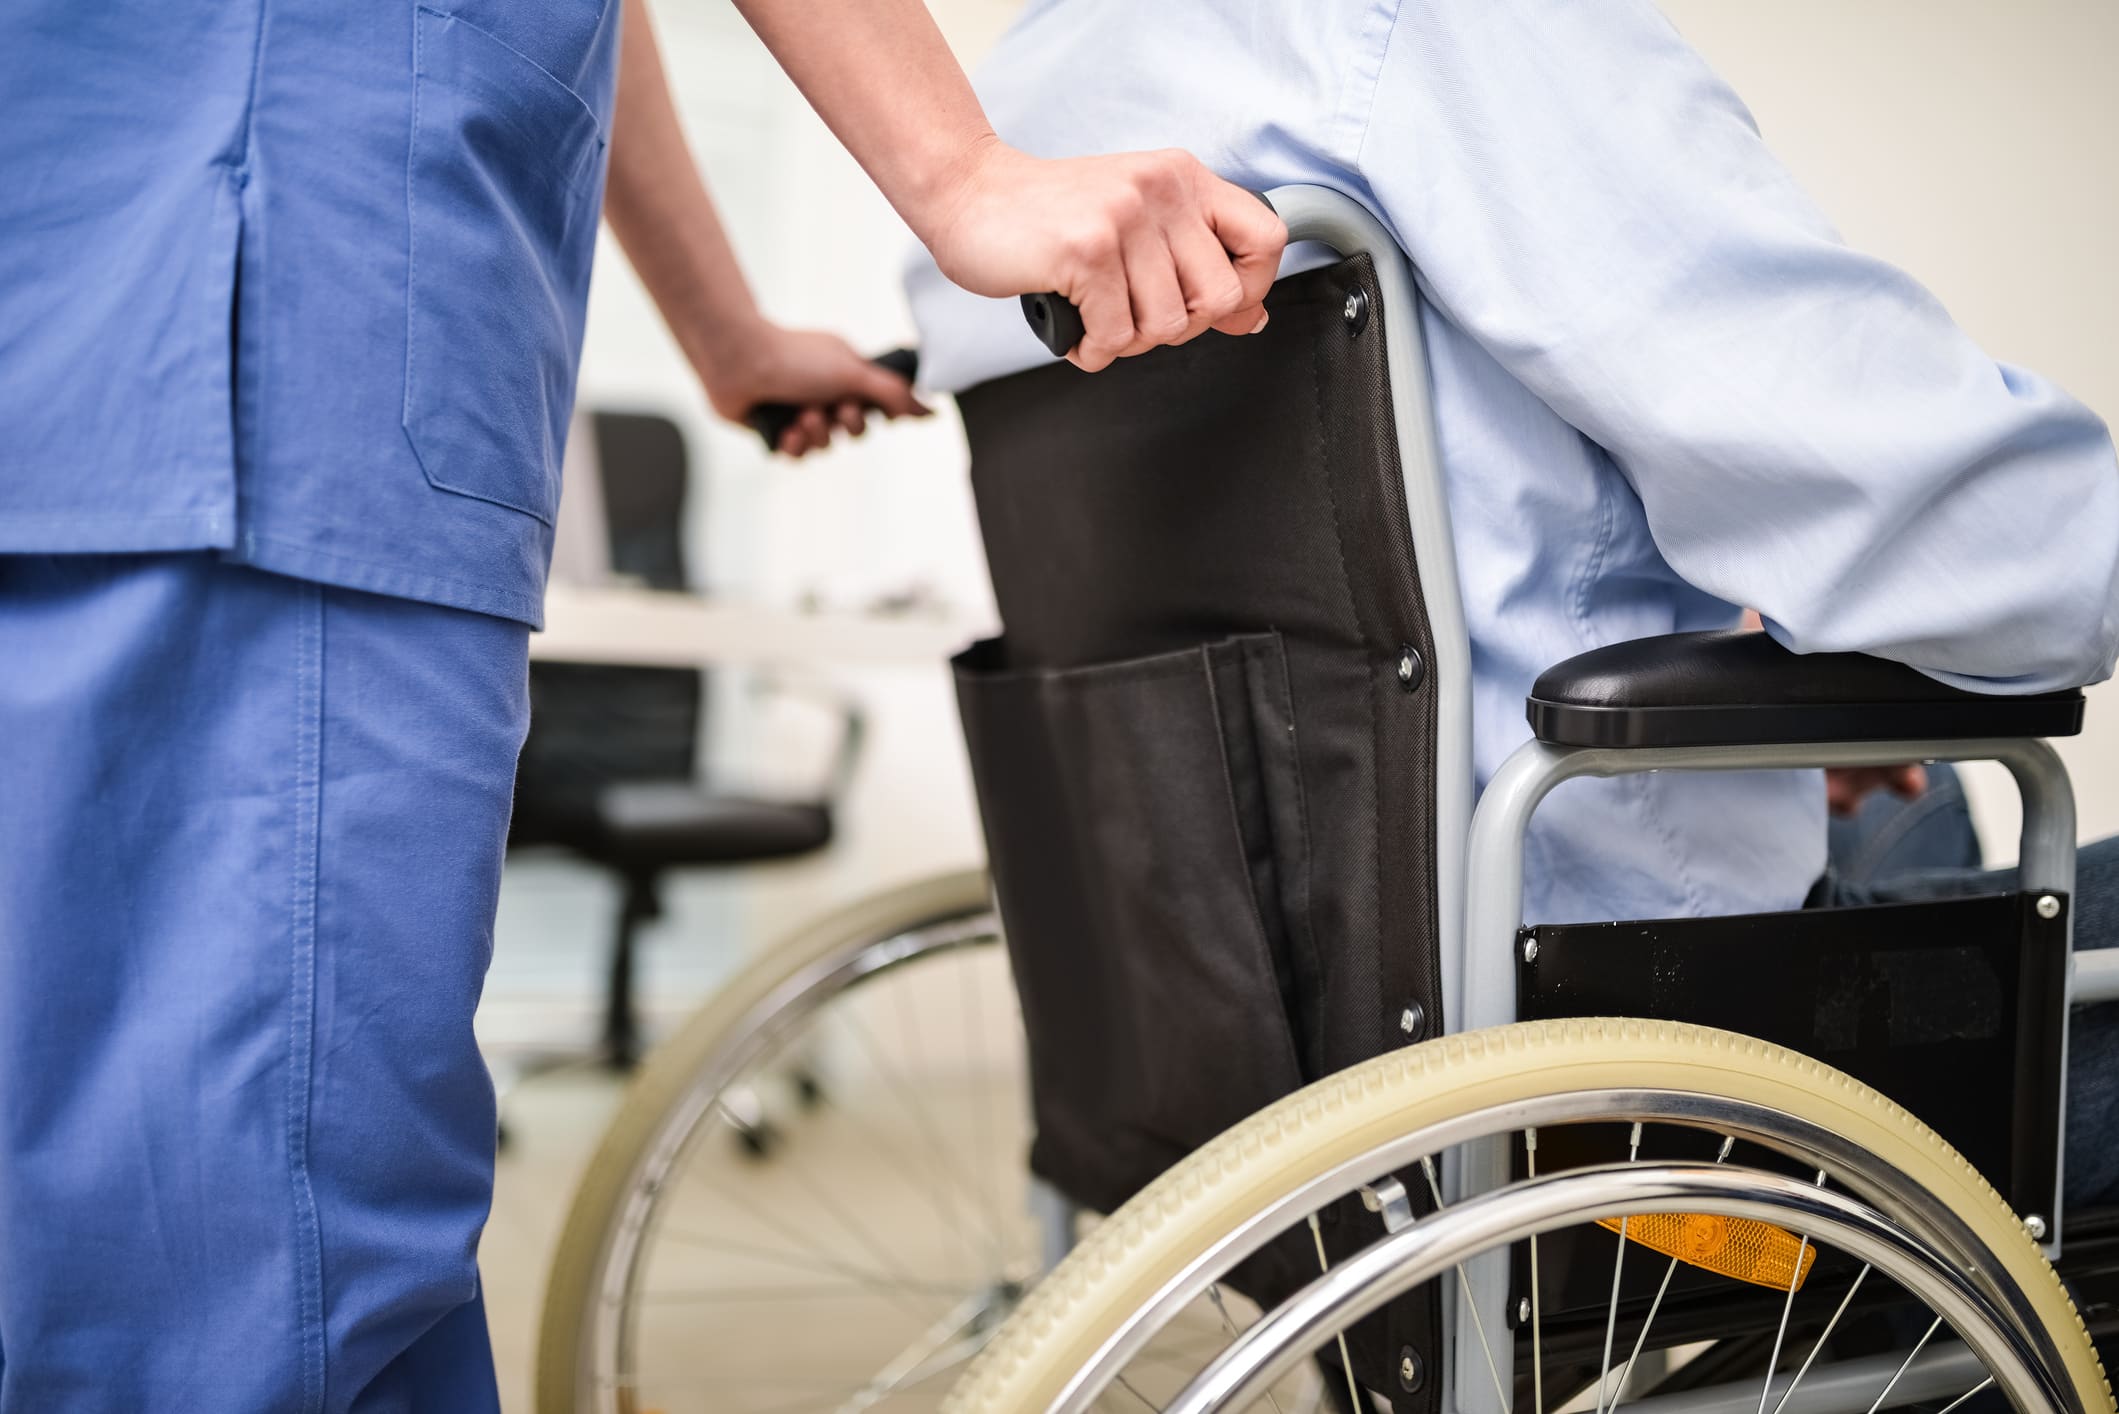 Could I Face A Nursing Home Lawsuit for A Family Member?